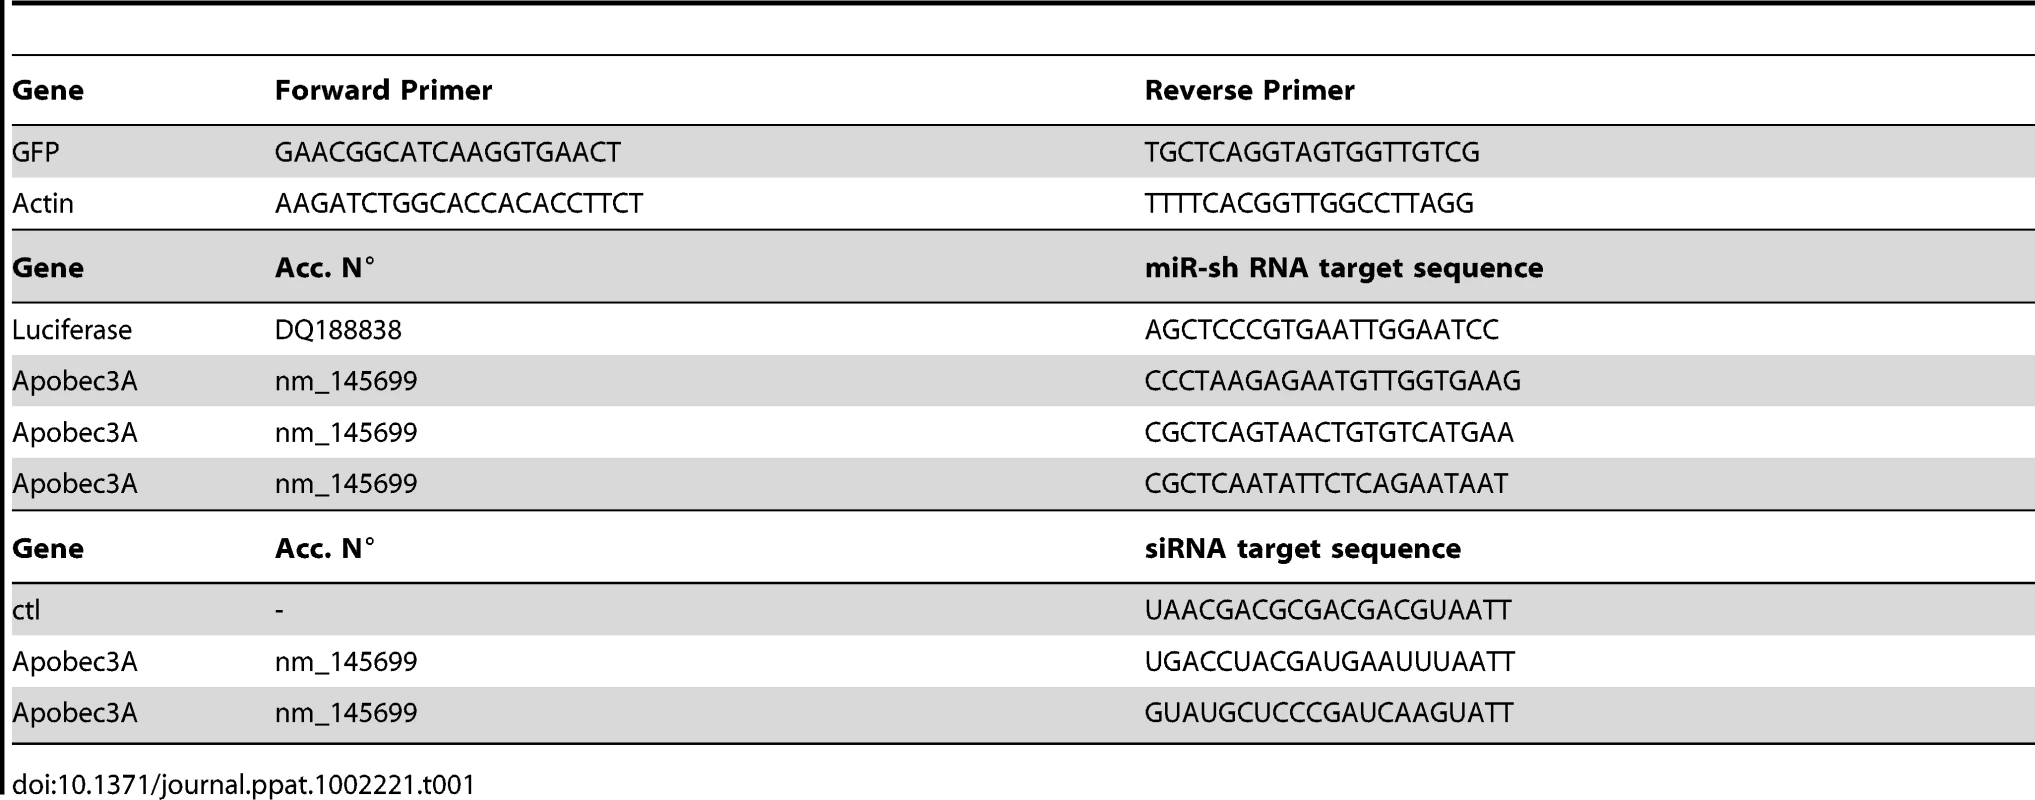 List of primers and sequences used.